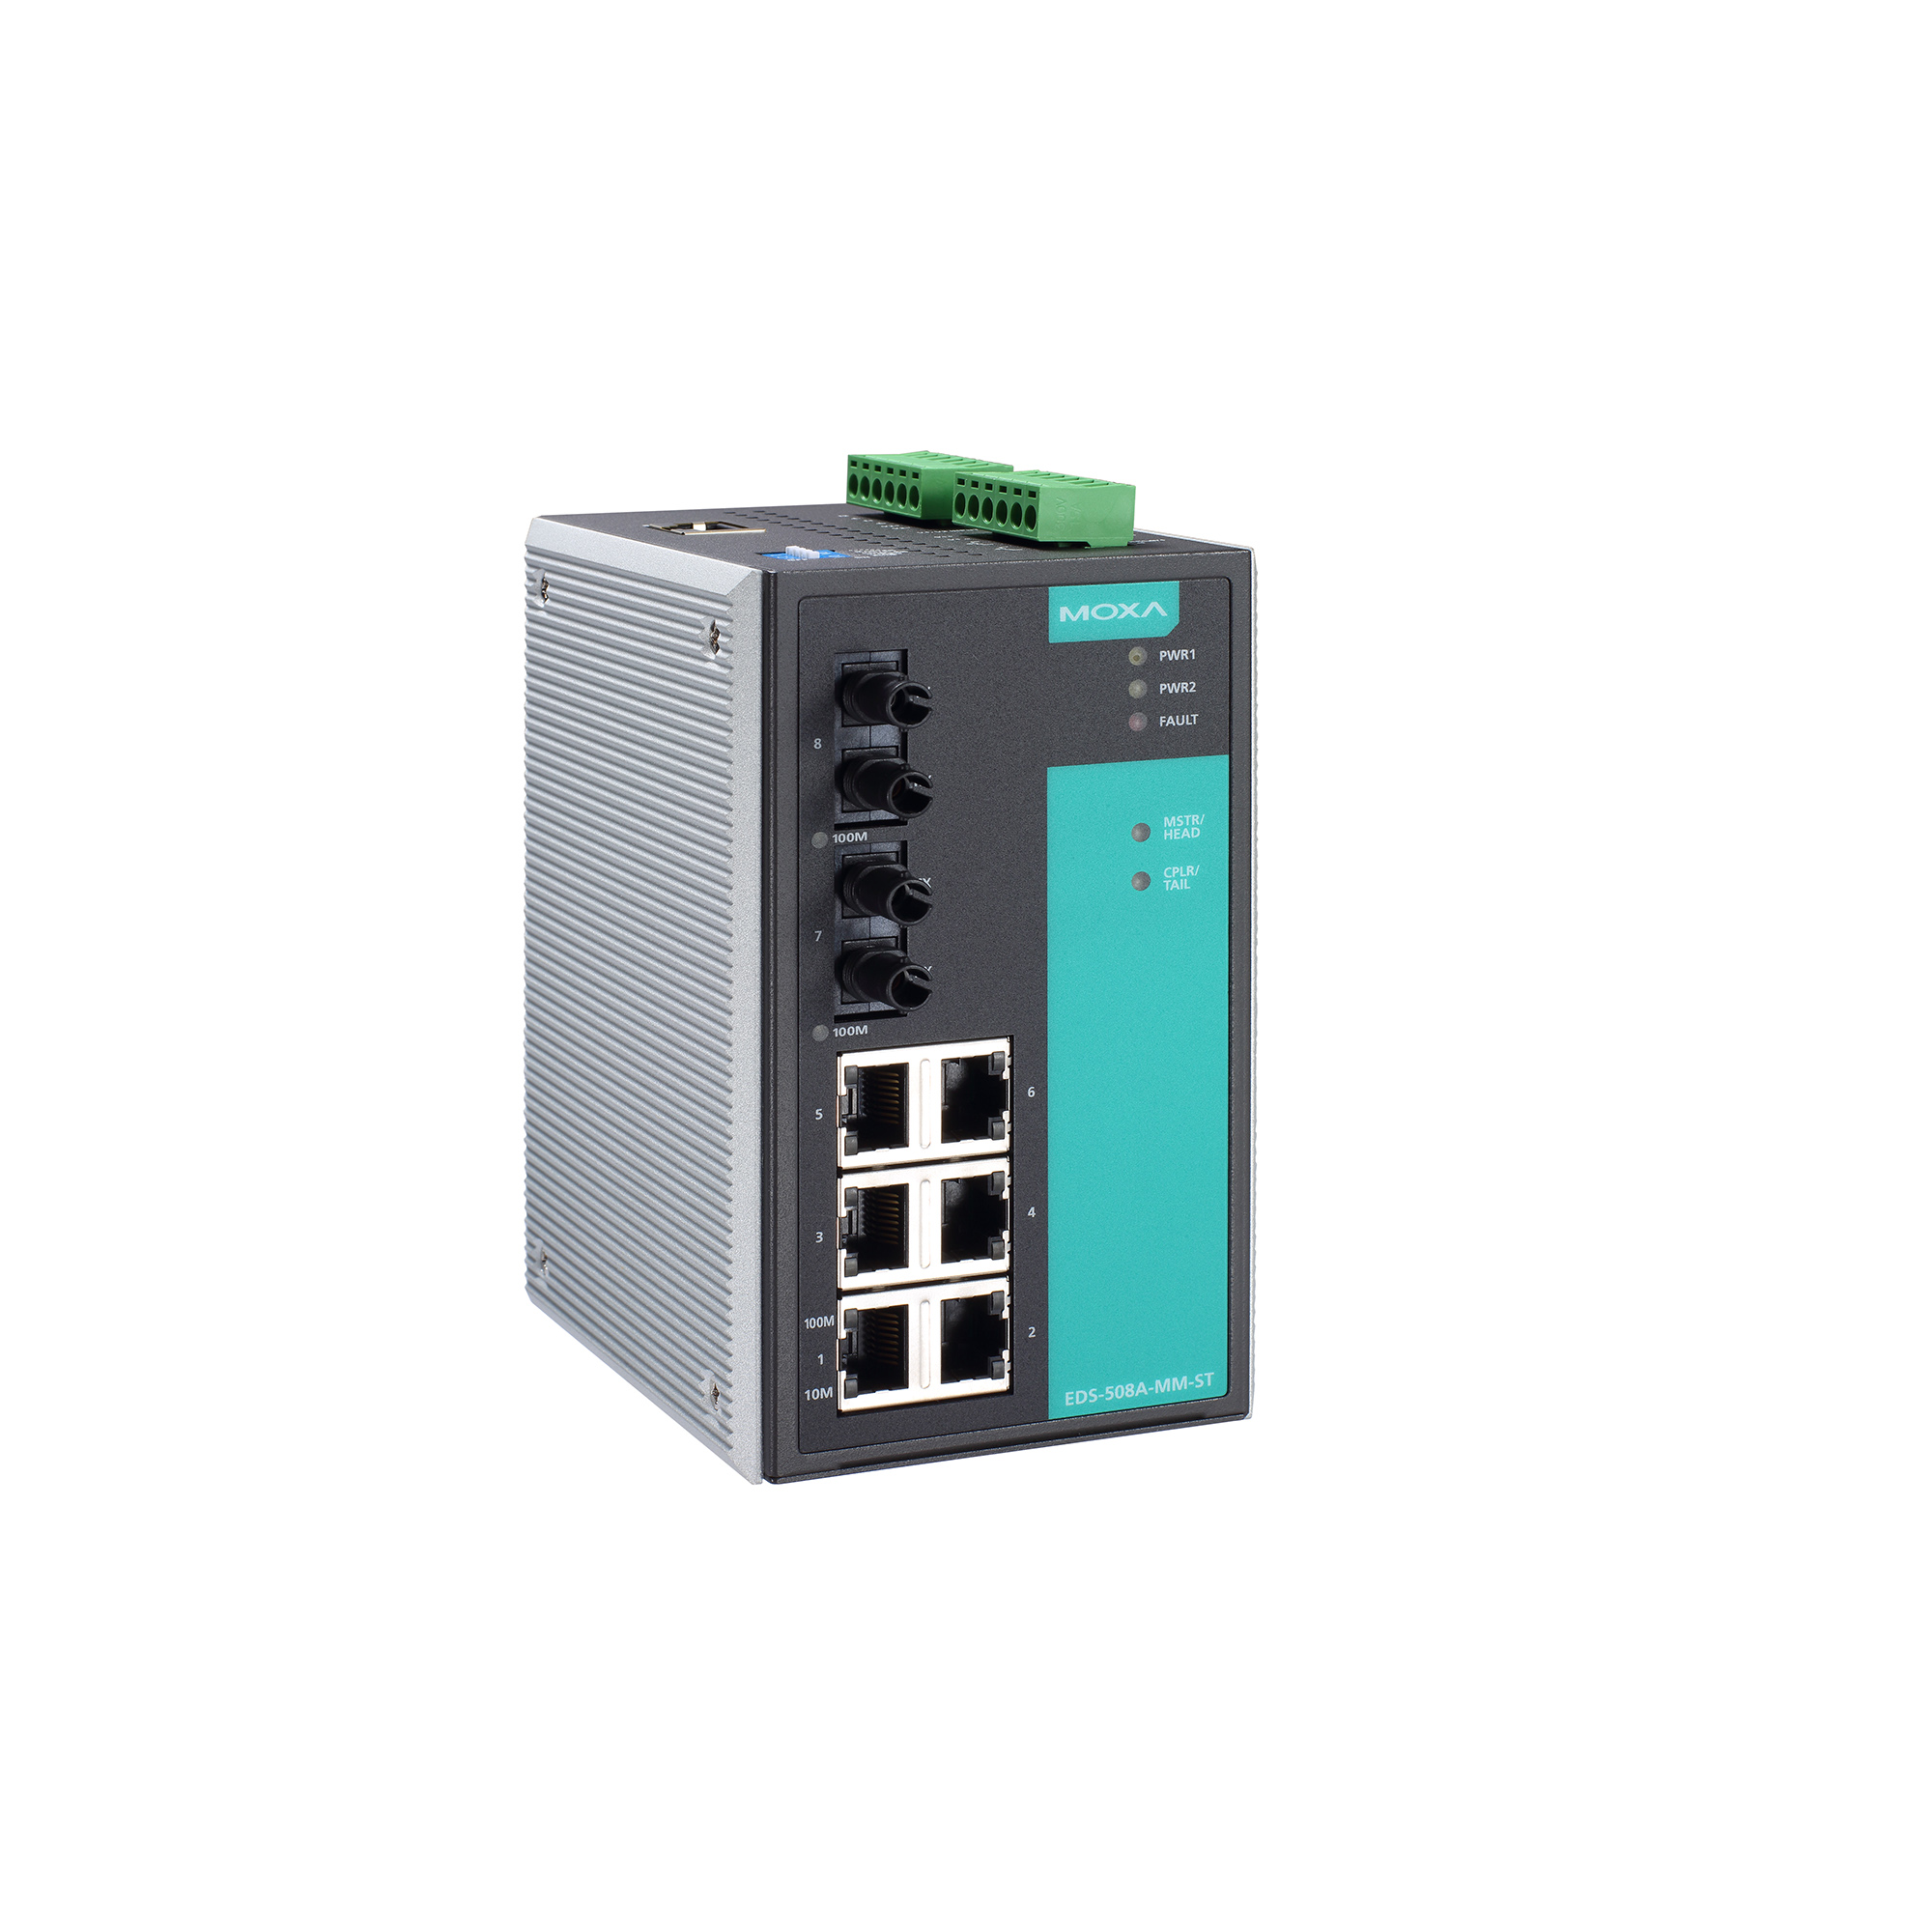 Eds 508a Series Layer 2 Managed Switches Moxa